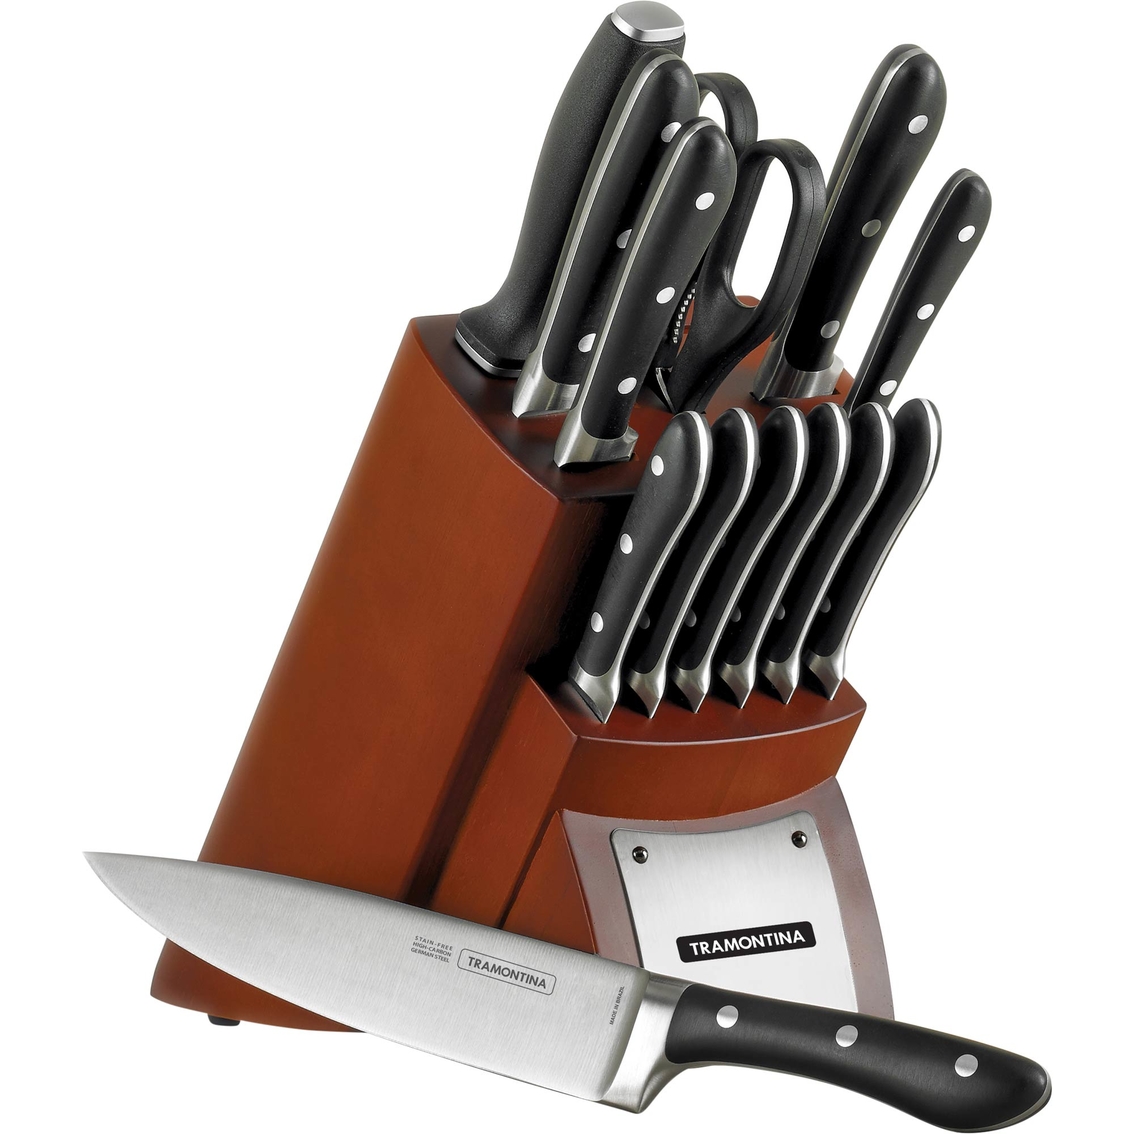 Tramontina Professional Series 14 Pc. Cutlery Block Set, Cutlery, Household